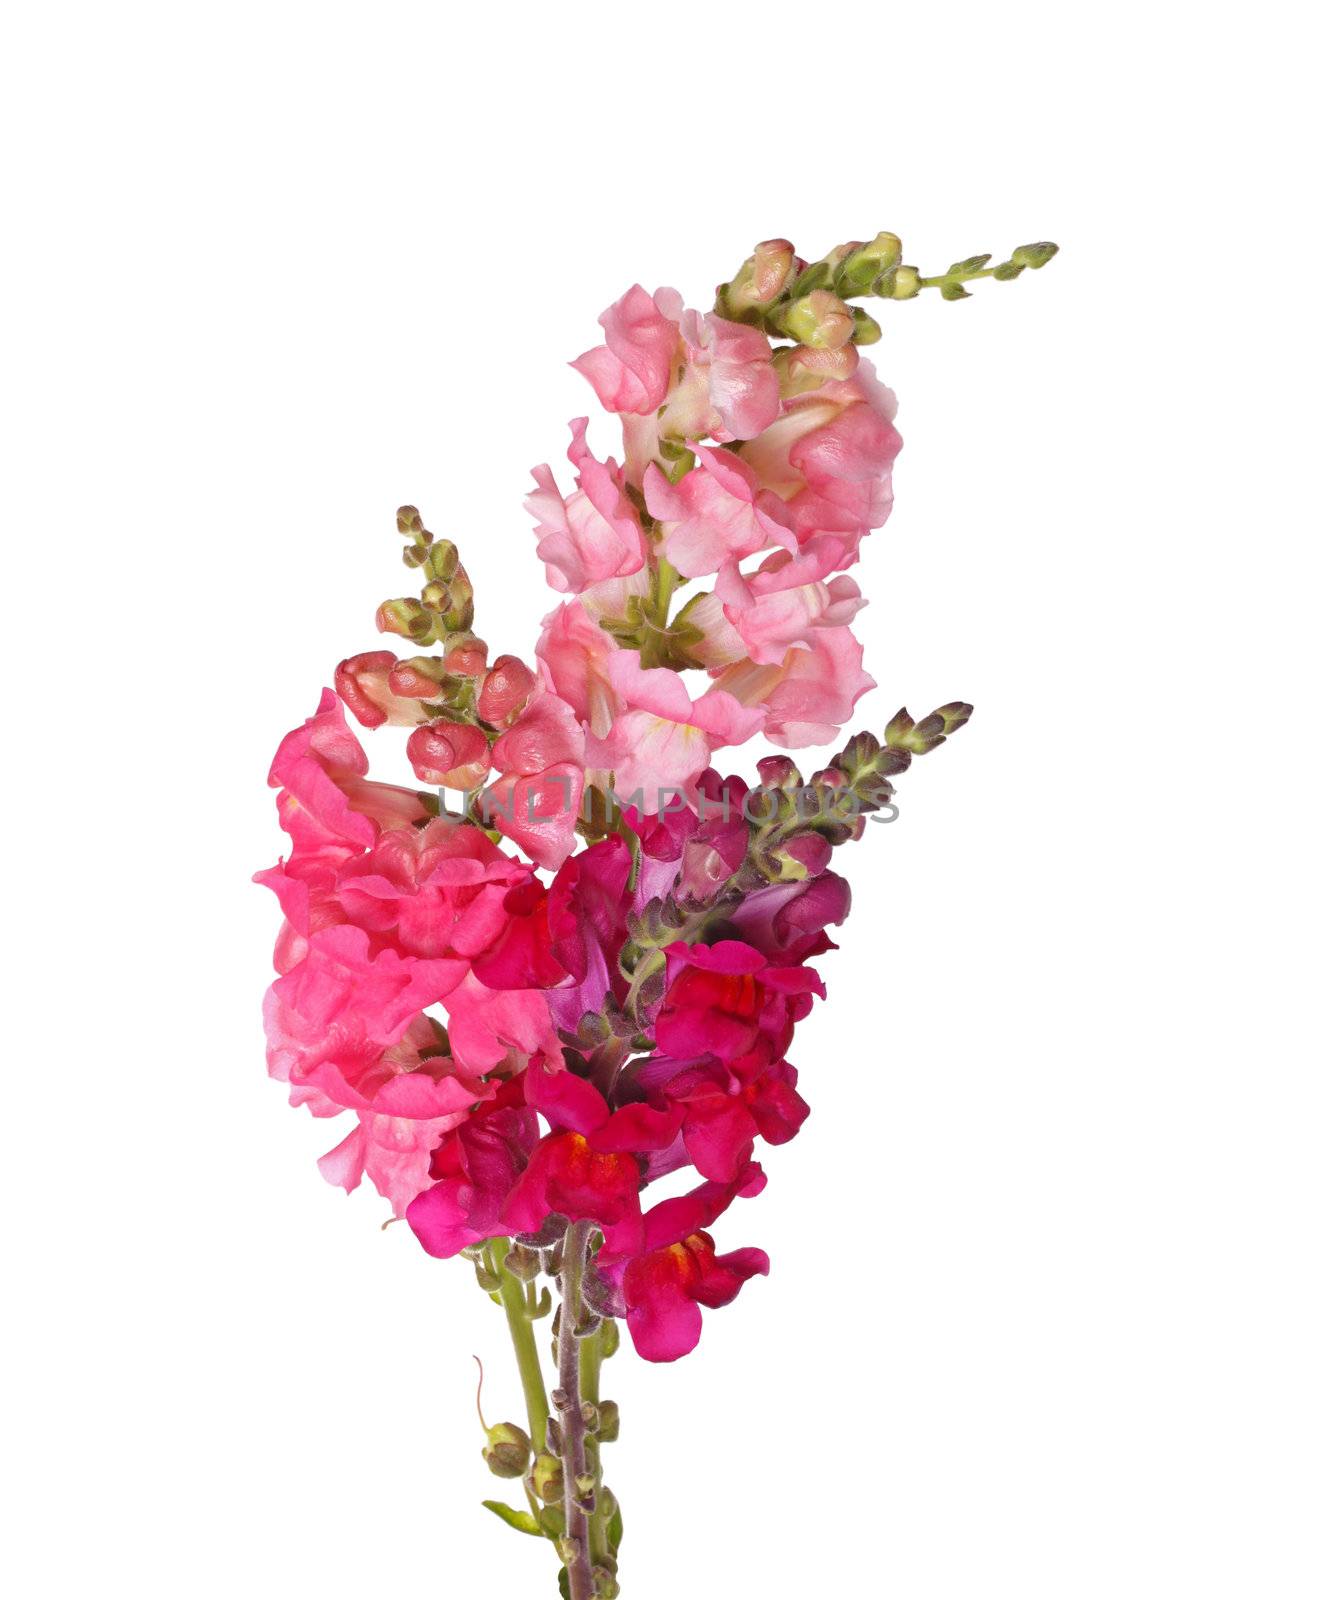 Several stems with pink, red, purple and yellow flowers of snapdragons (Antirrhinum majus) isolated against a white background